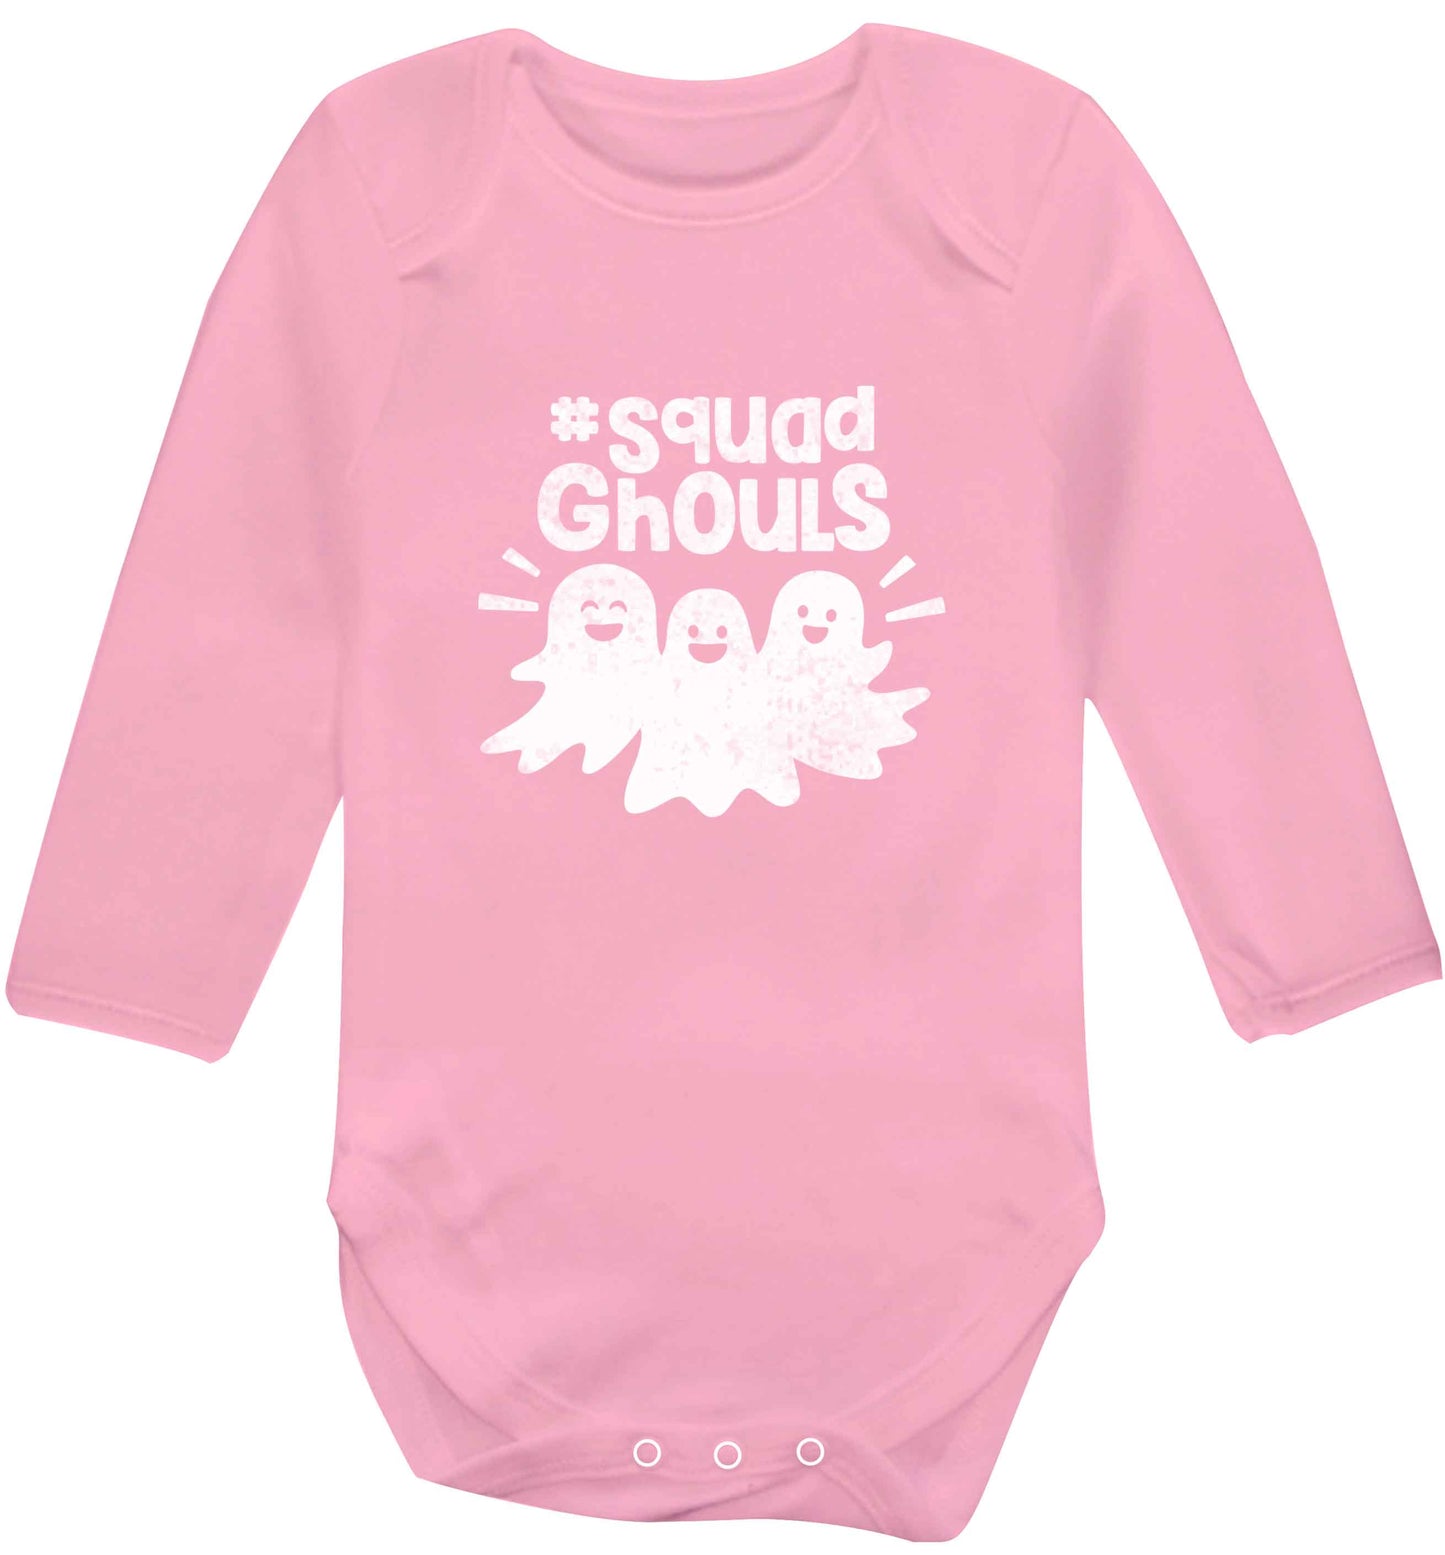 Squad ghouls Kit baby vest long sleeved pale pink 6-12 months